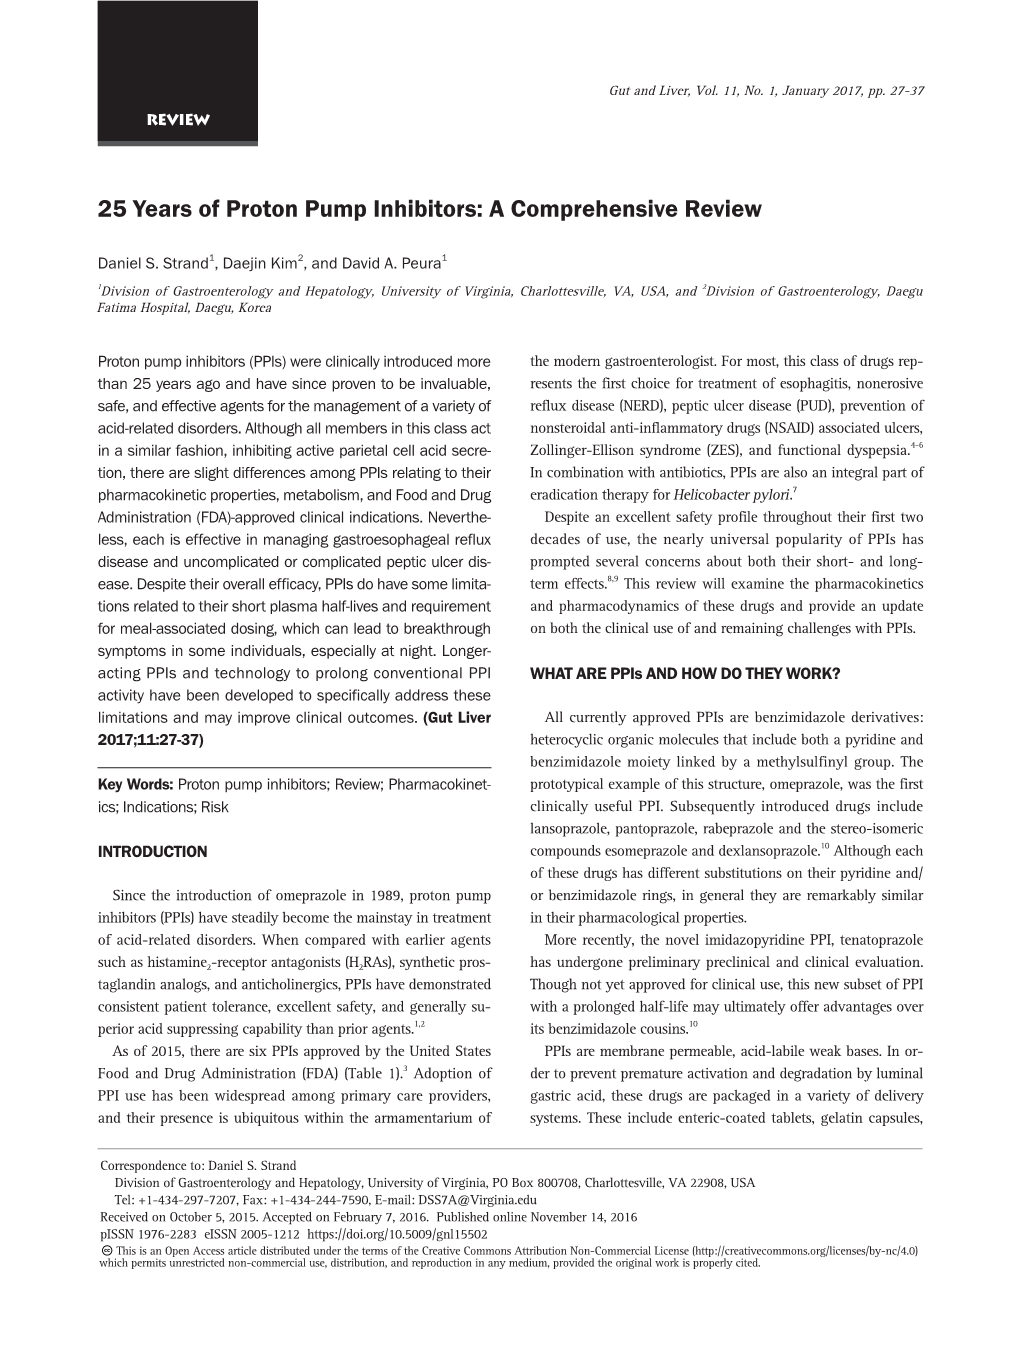 25 Years of Proton Pump Inhibitors: a Comprehensive Review